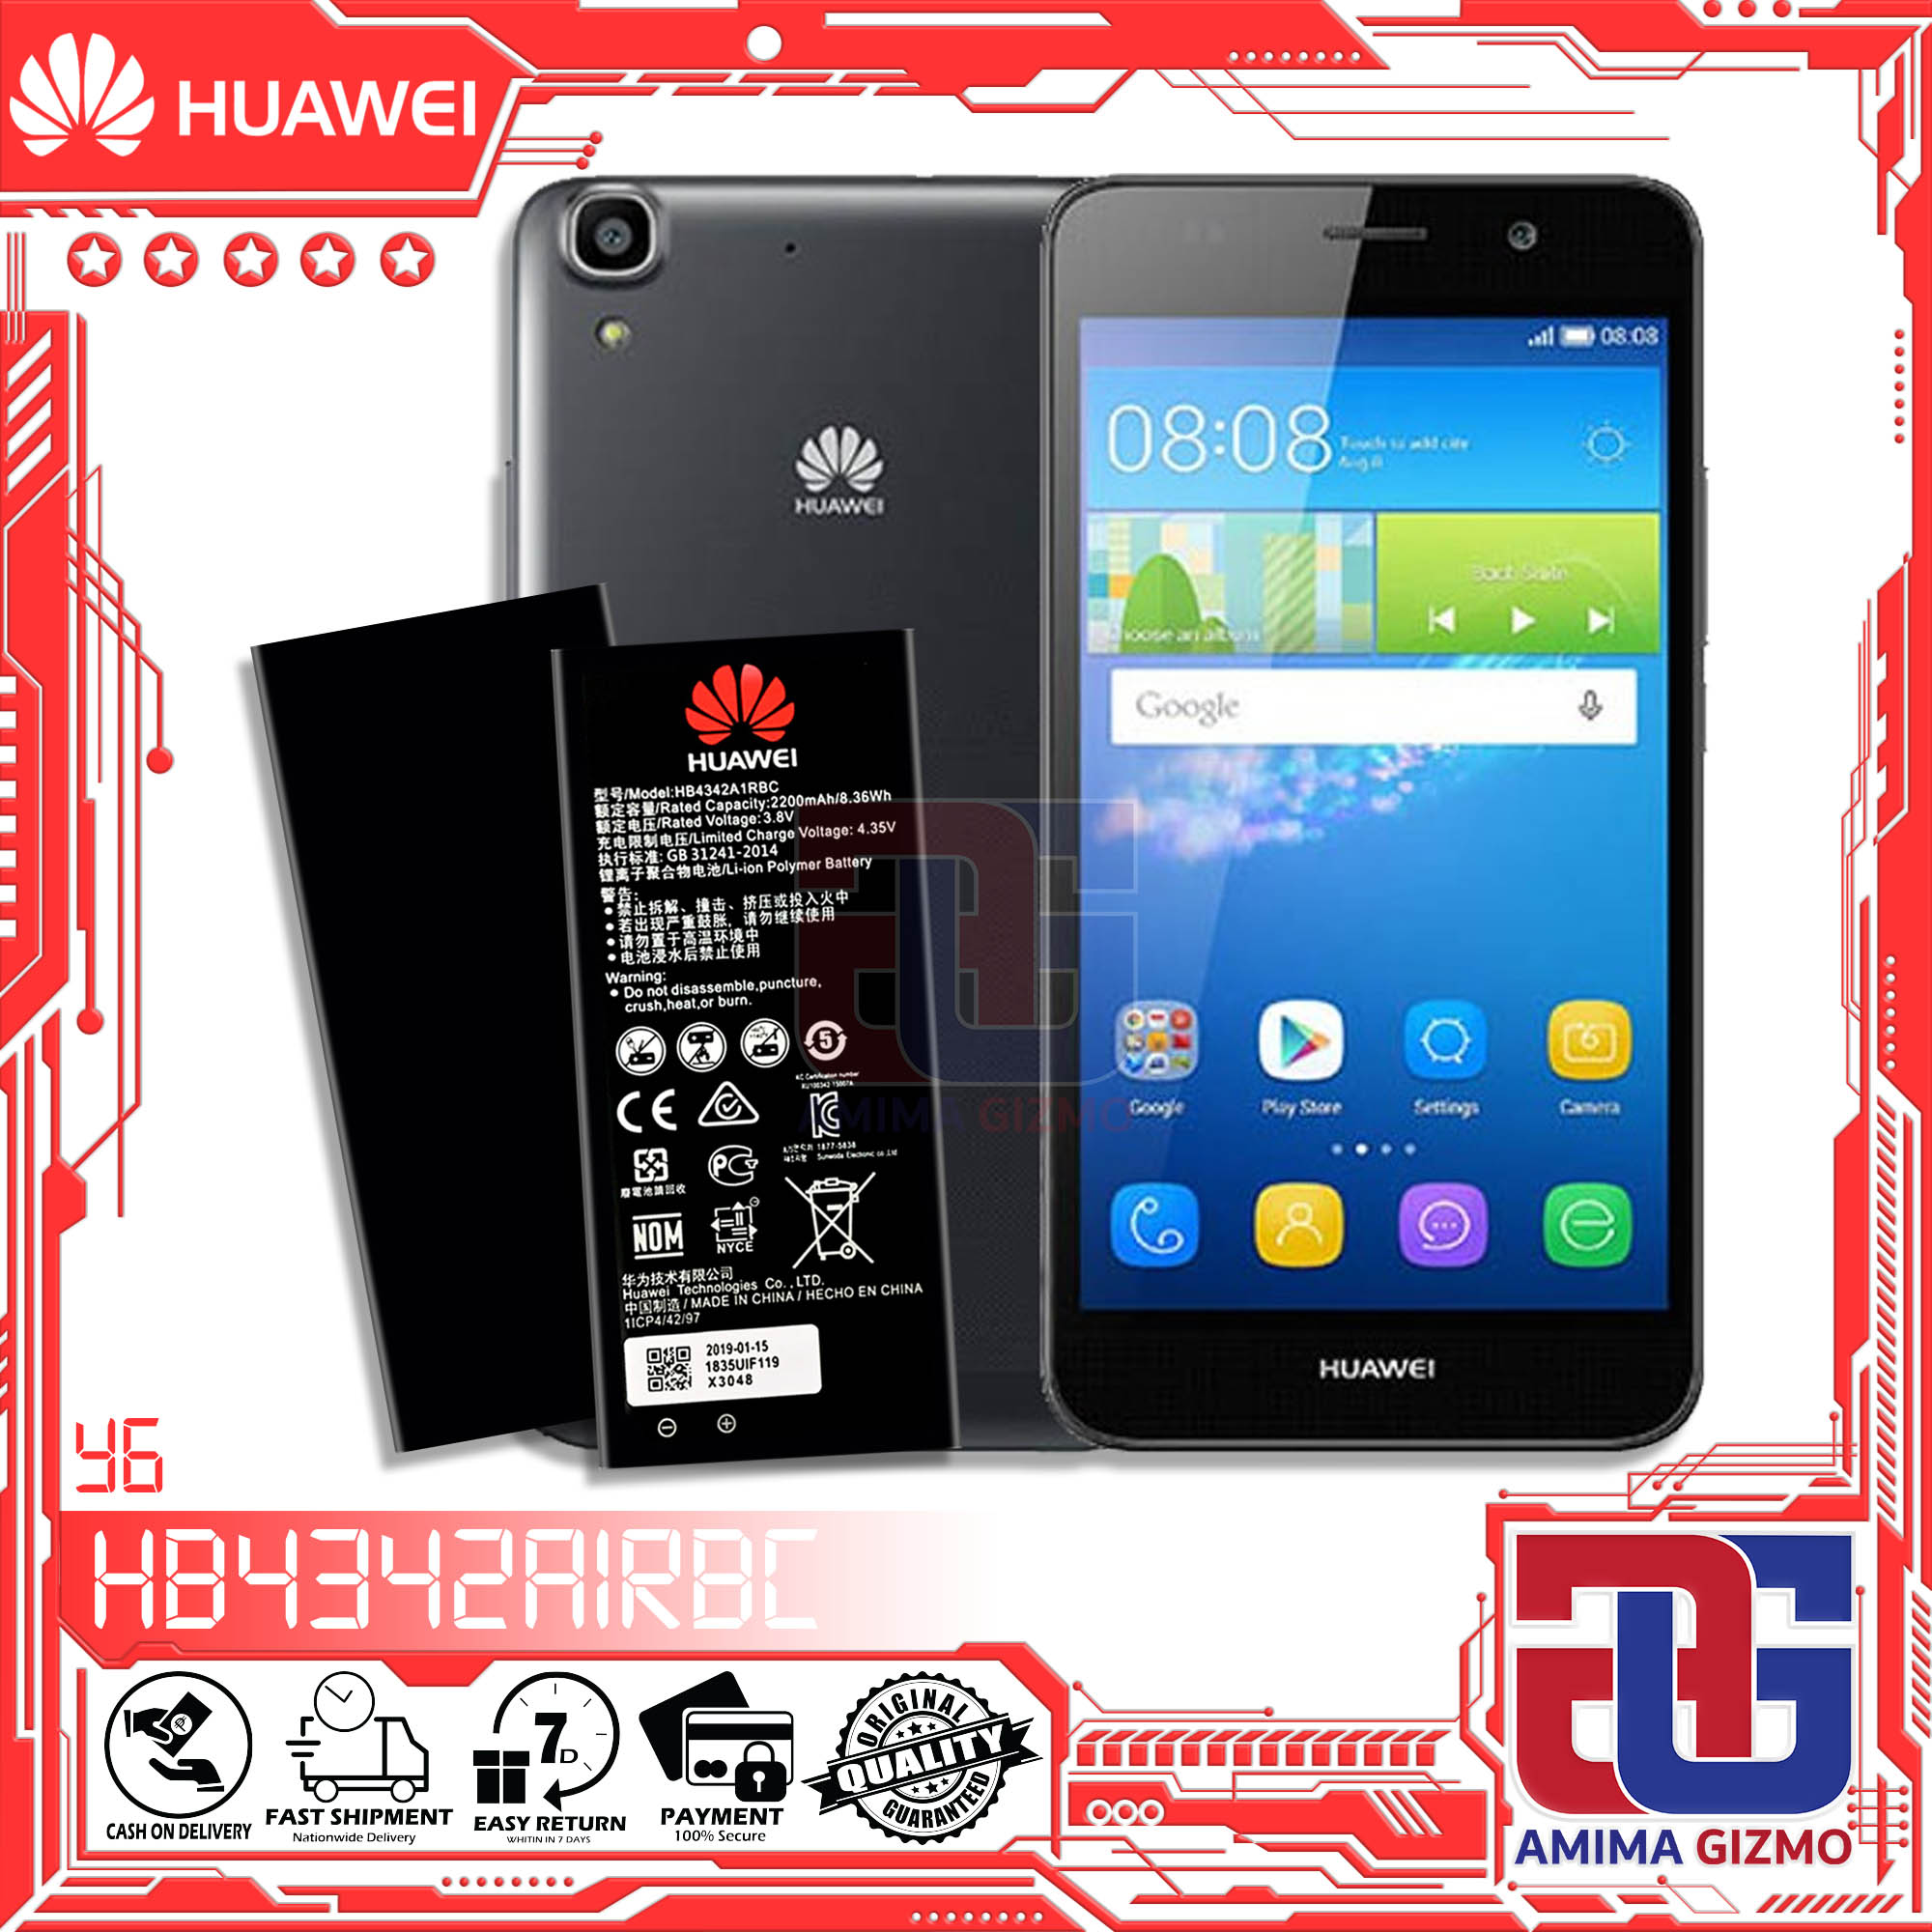 Huawei Y6 2015 Original Quality and Capacity Model HB4342A1RBC. Fit for SCC-U21, SCL-U31, SCC-U21 / Honor 5 Play / Honor 4A . AMIMA Gizmo Removable Replacement Same Size as